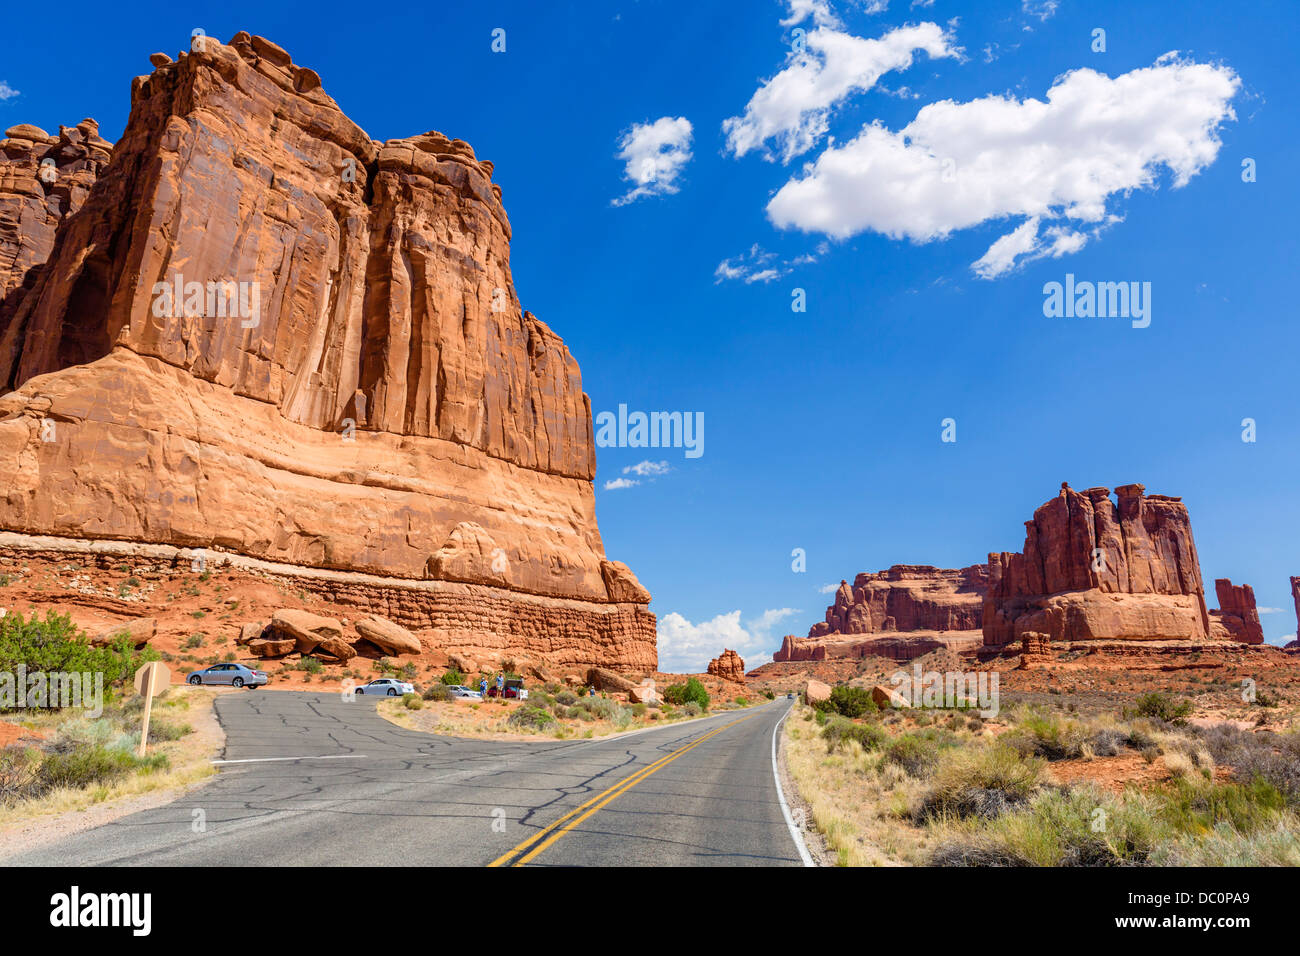 Road through Arches National Park near Courthouse Towers viewpoint, Utah, USA Stock Photo